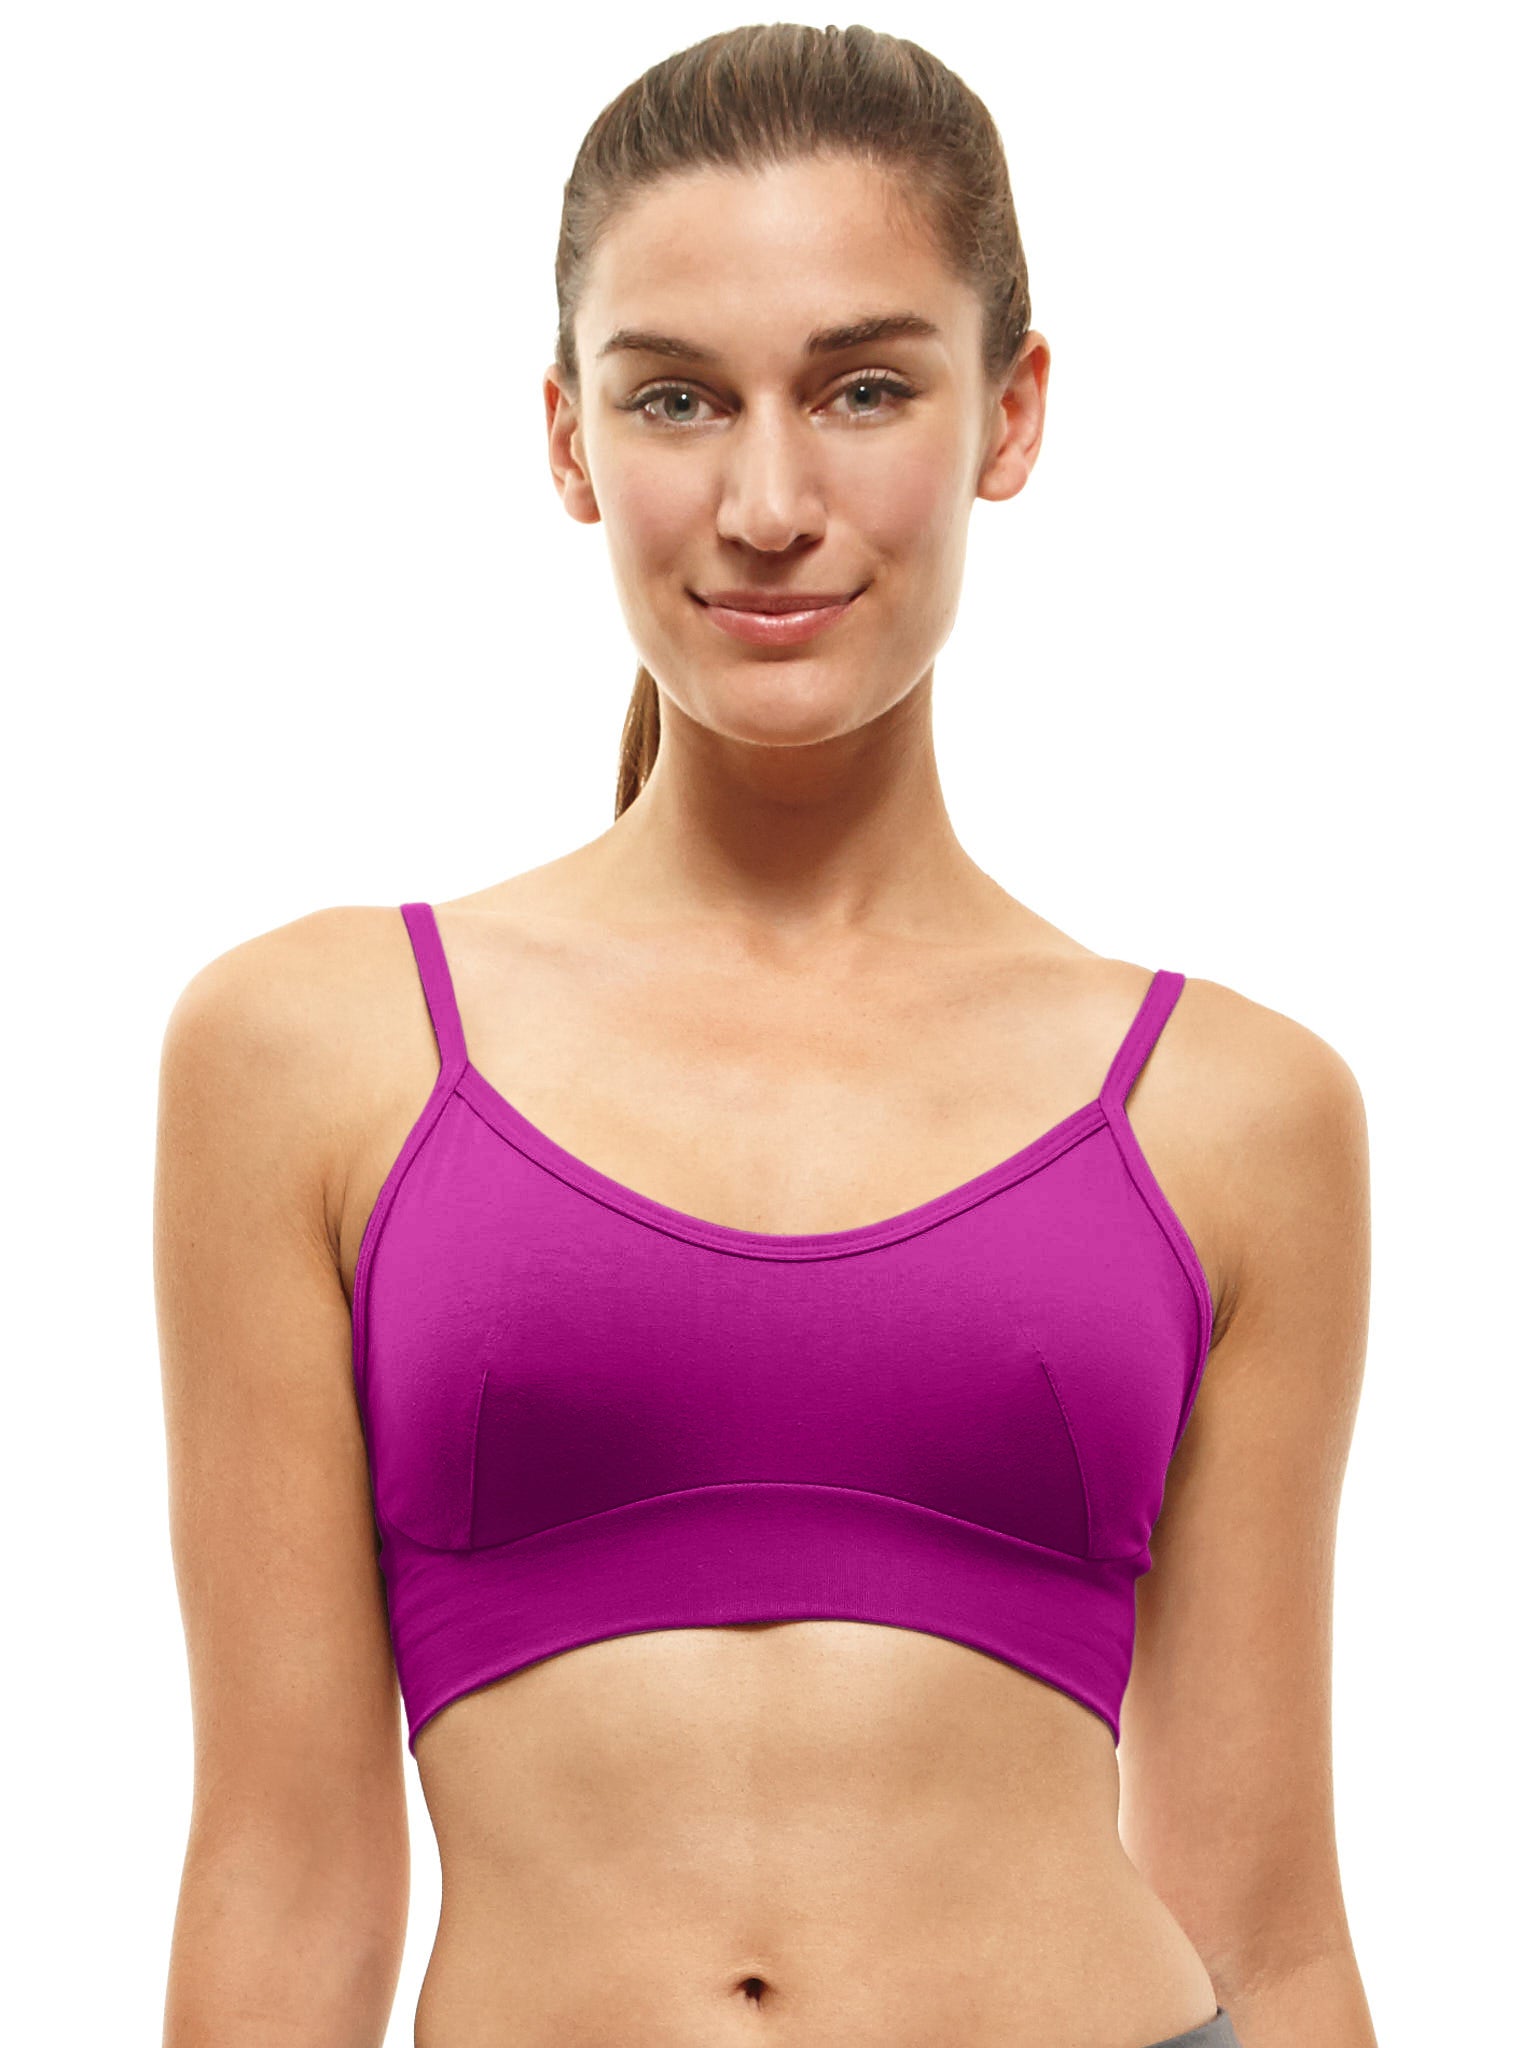 Buy KIWI RATA Camisoles For Women With Built In Bra, Summer, 46% OFF